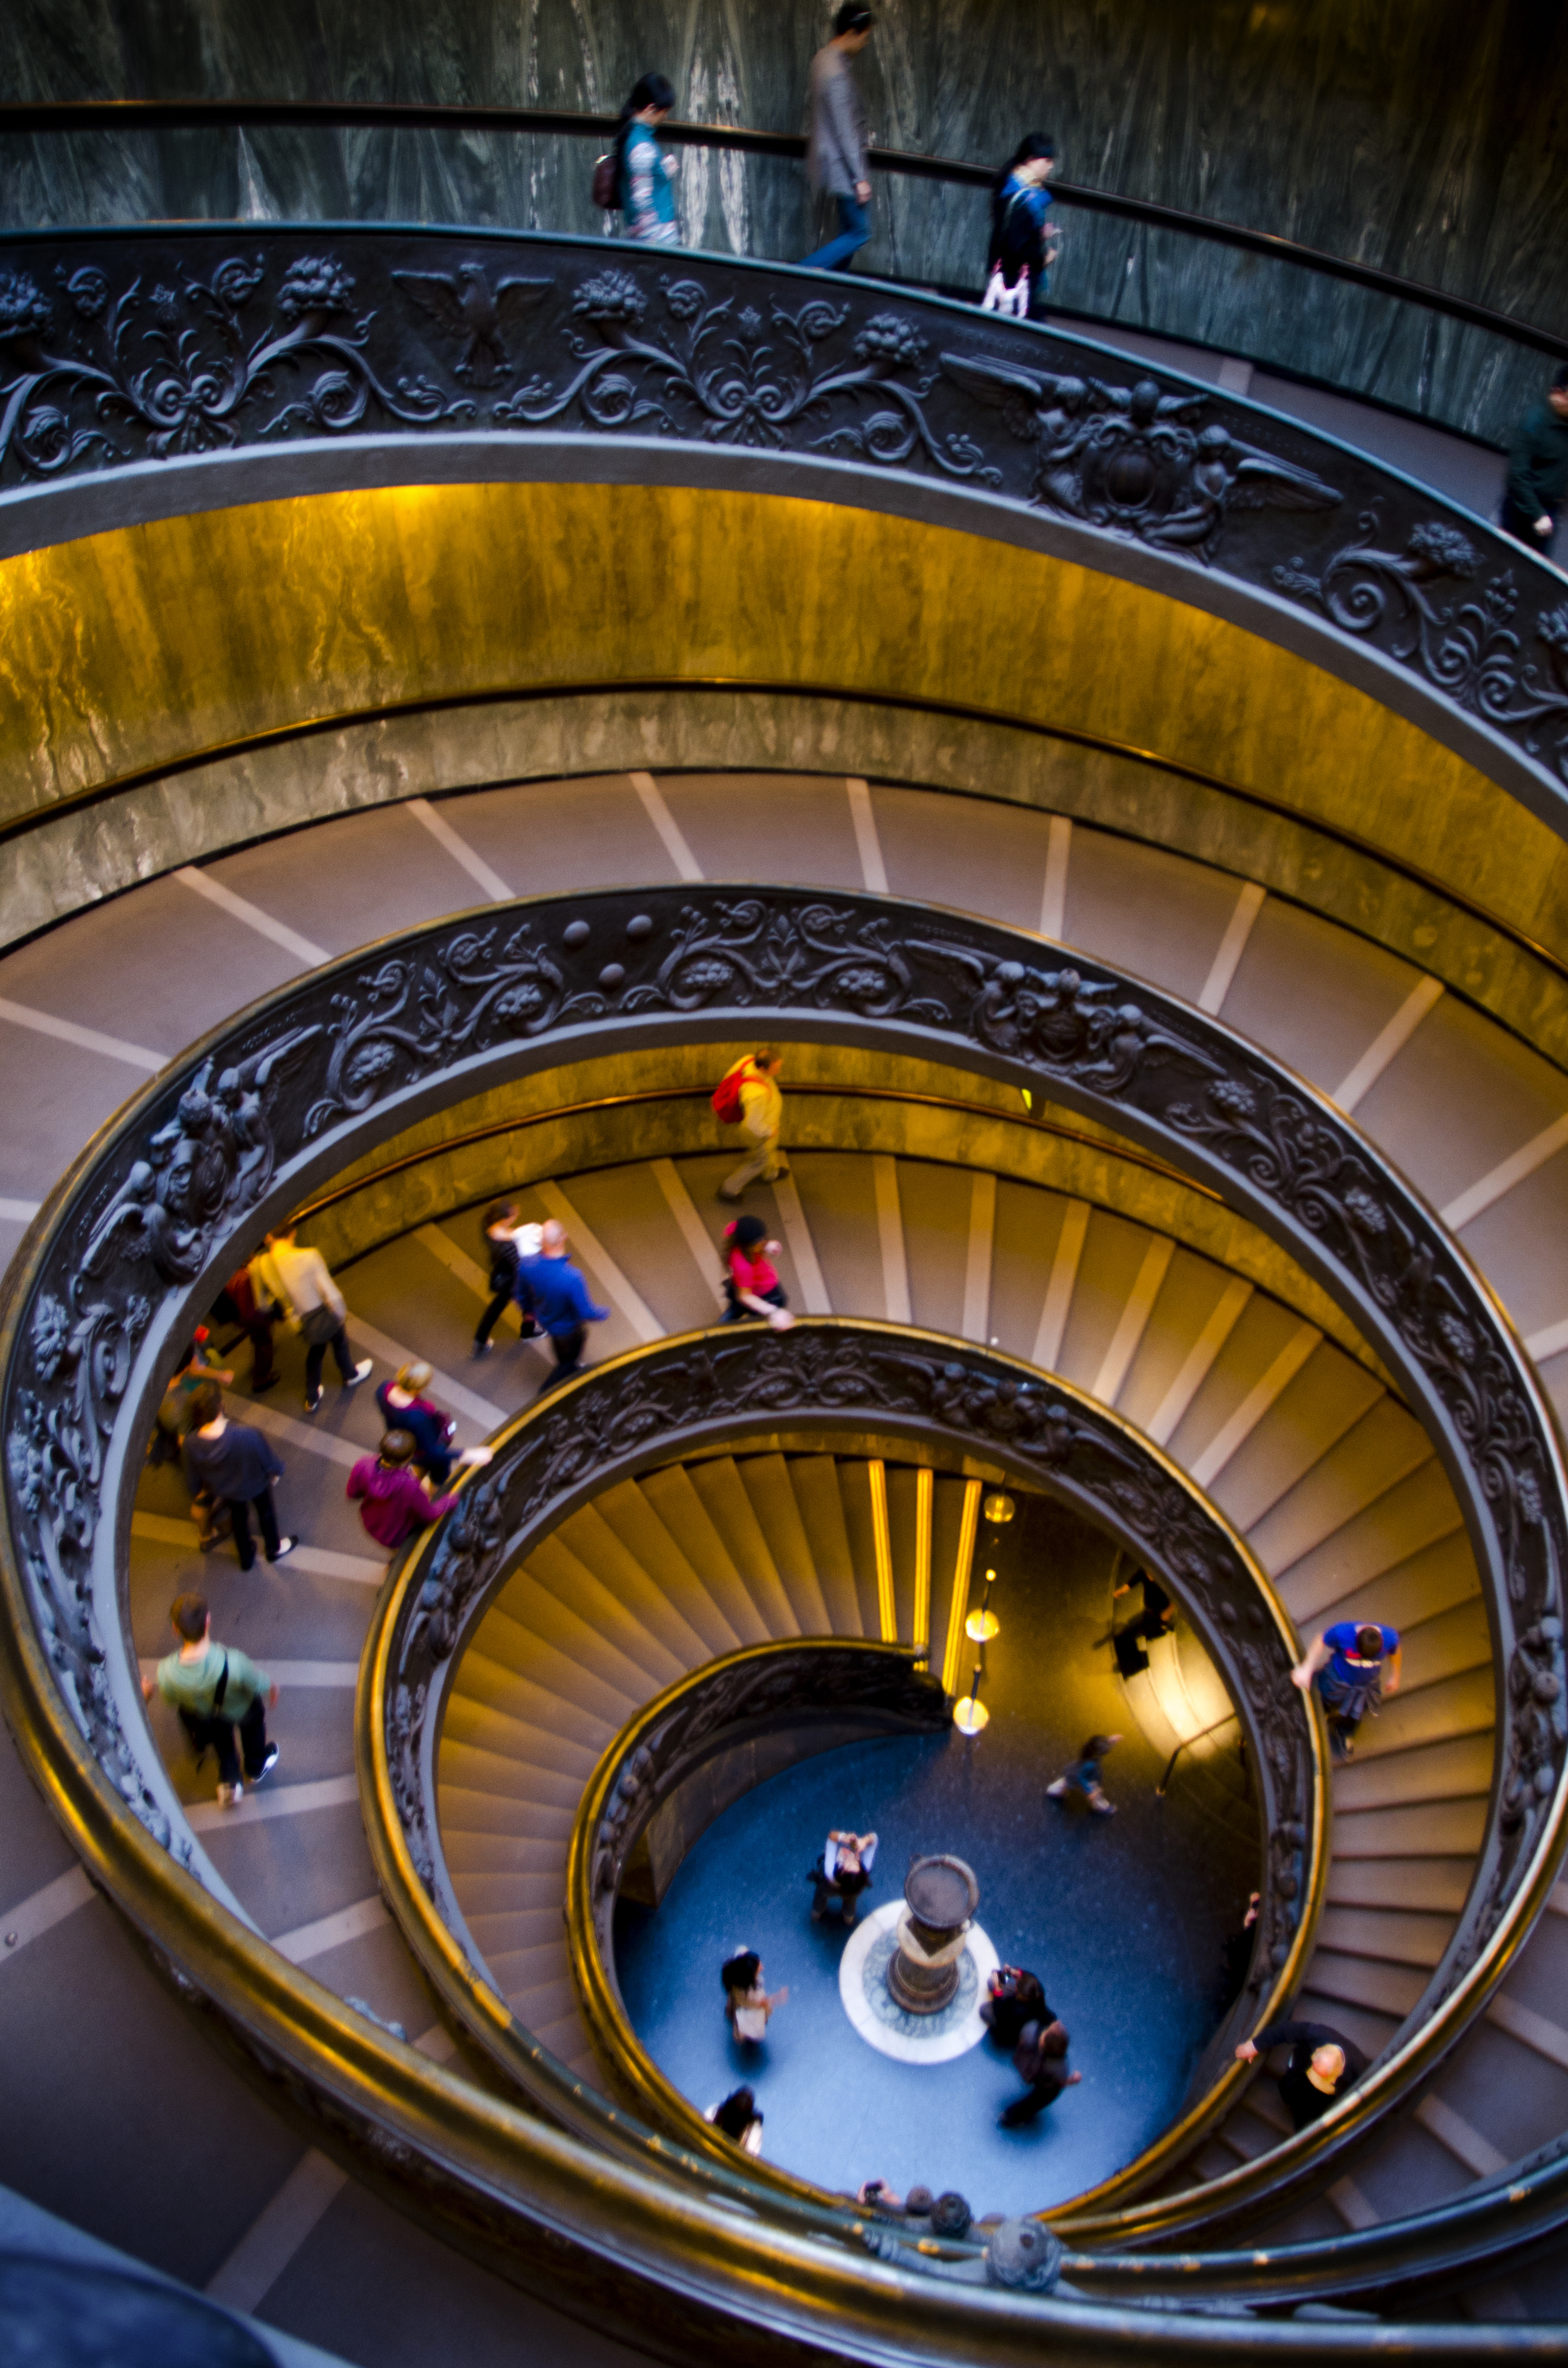  This winding path&nbsp;leads to the exit of the Vatican Museums,&nbsp;spiraling&nbsp;downwards on a shallow slope, causing patrons to tread carefully on the steps. 